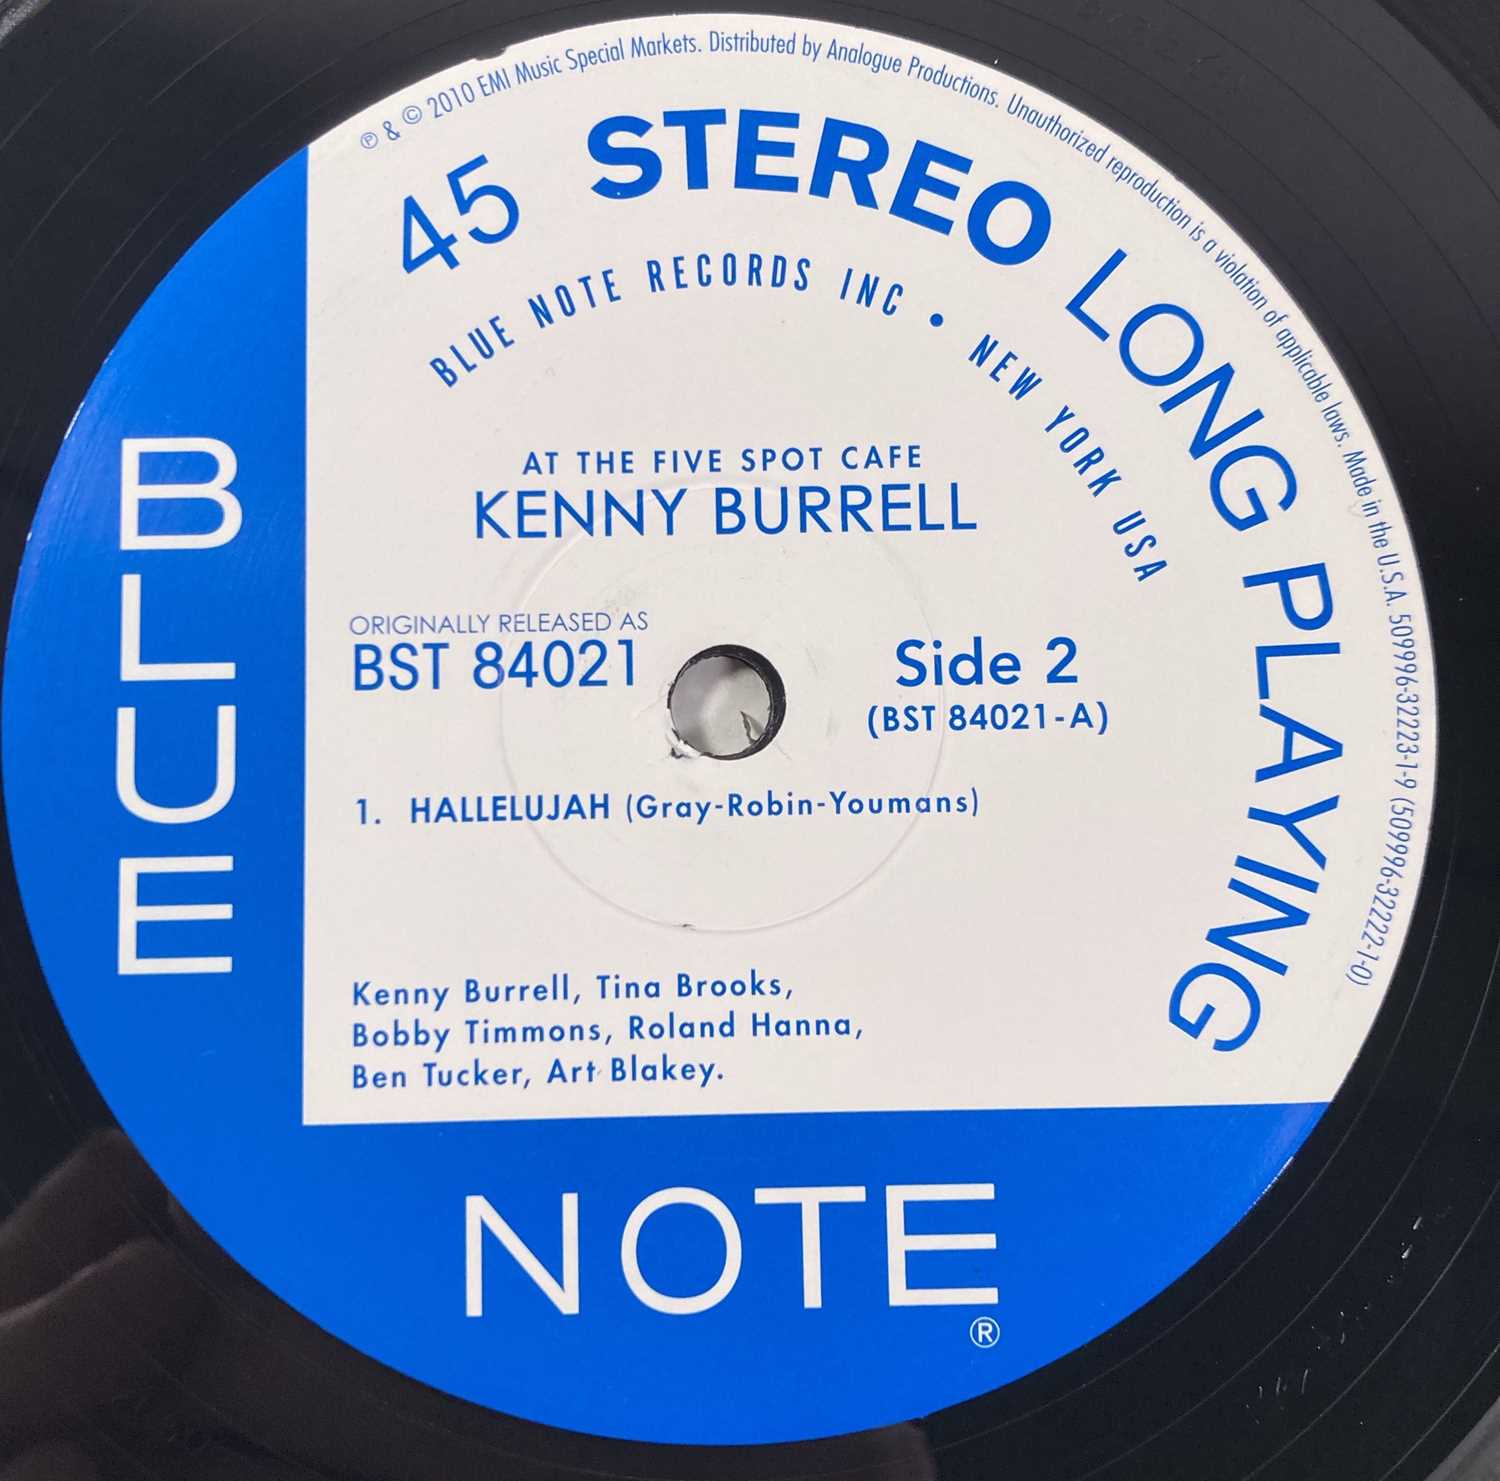 KENNY BURRELL WITH ART BLAKEY - ON VIEW AT THE FIVE SPOT CAFE LP (2010 LTD EDITION PRESSING - 509996 - Image 7 of 8